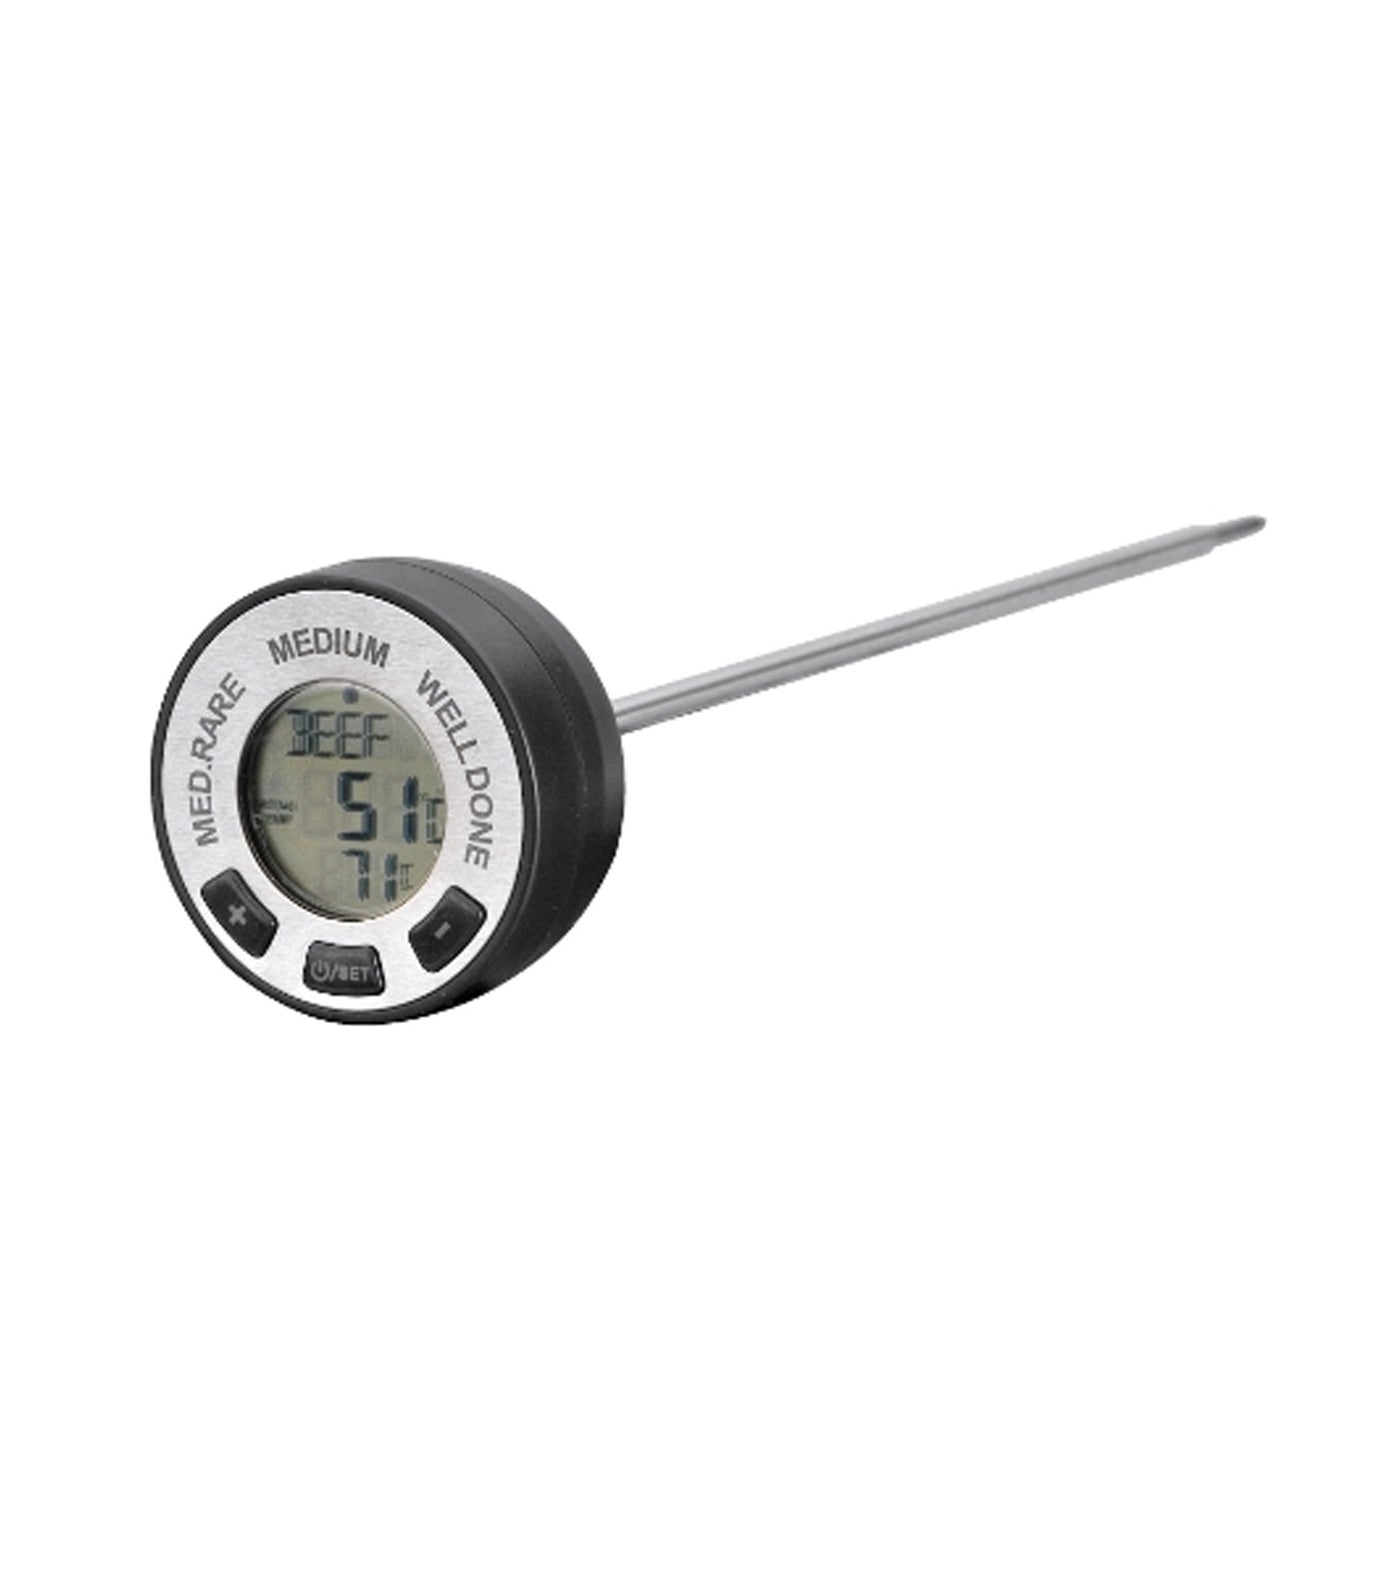 Lacor Digital Thermometer With Alarm